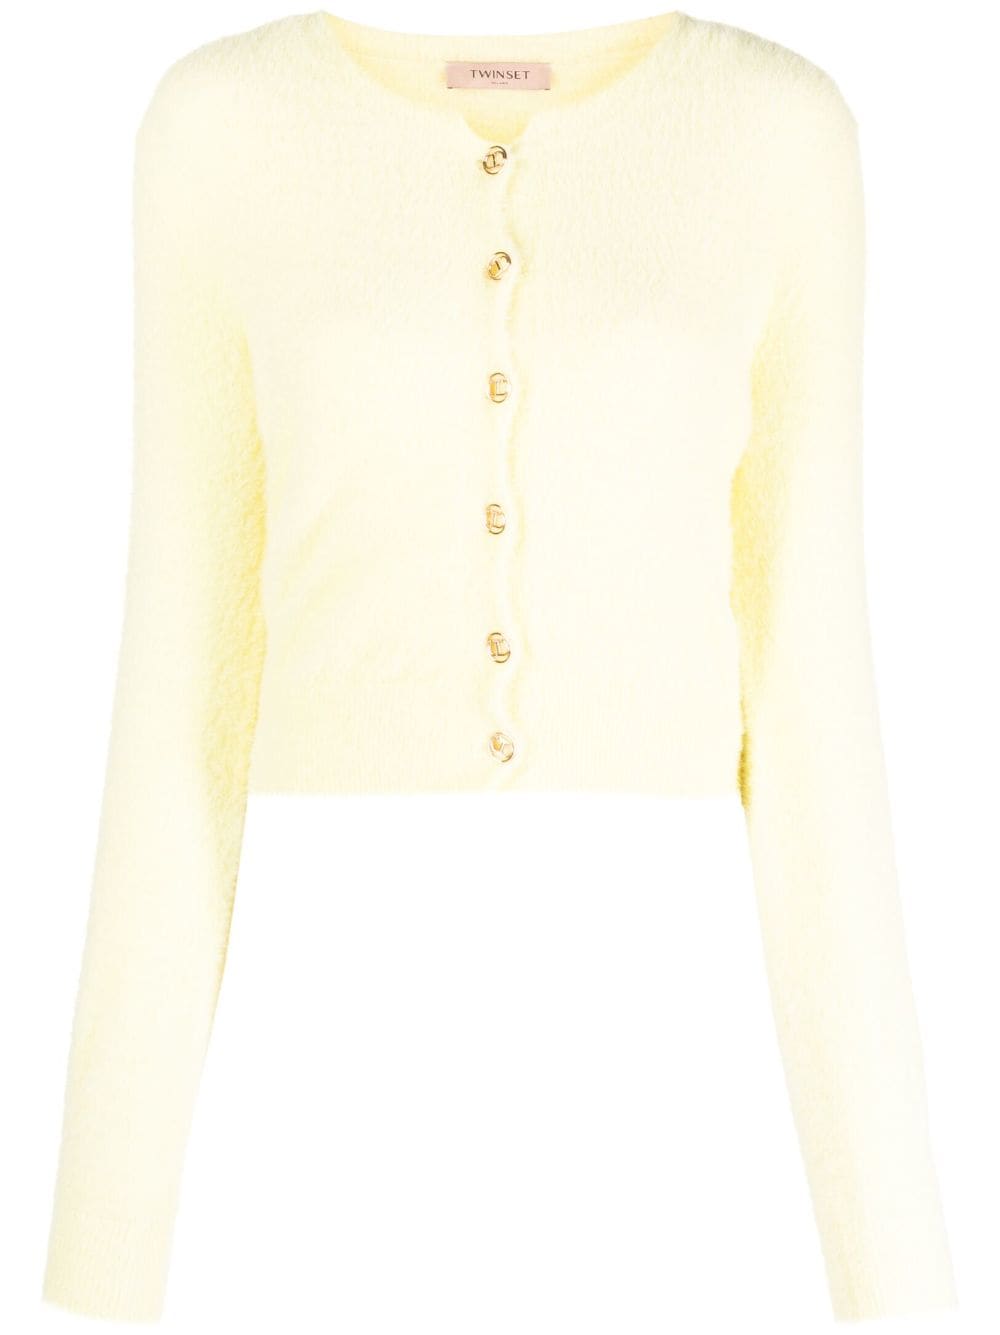 TWINSET brushed-finish knitted top and cardigan set - Yellow